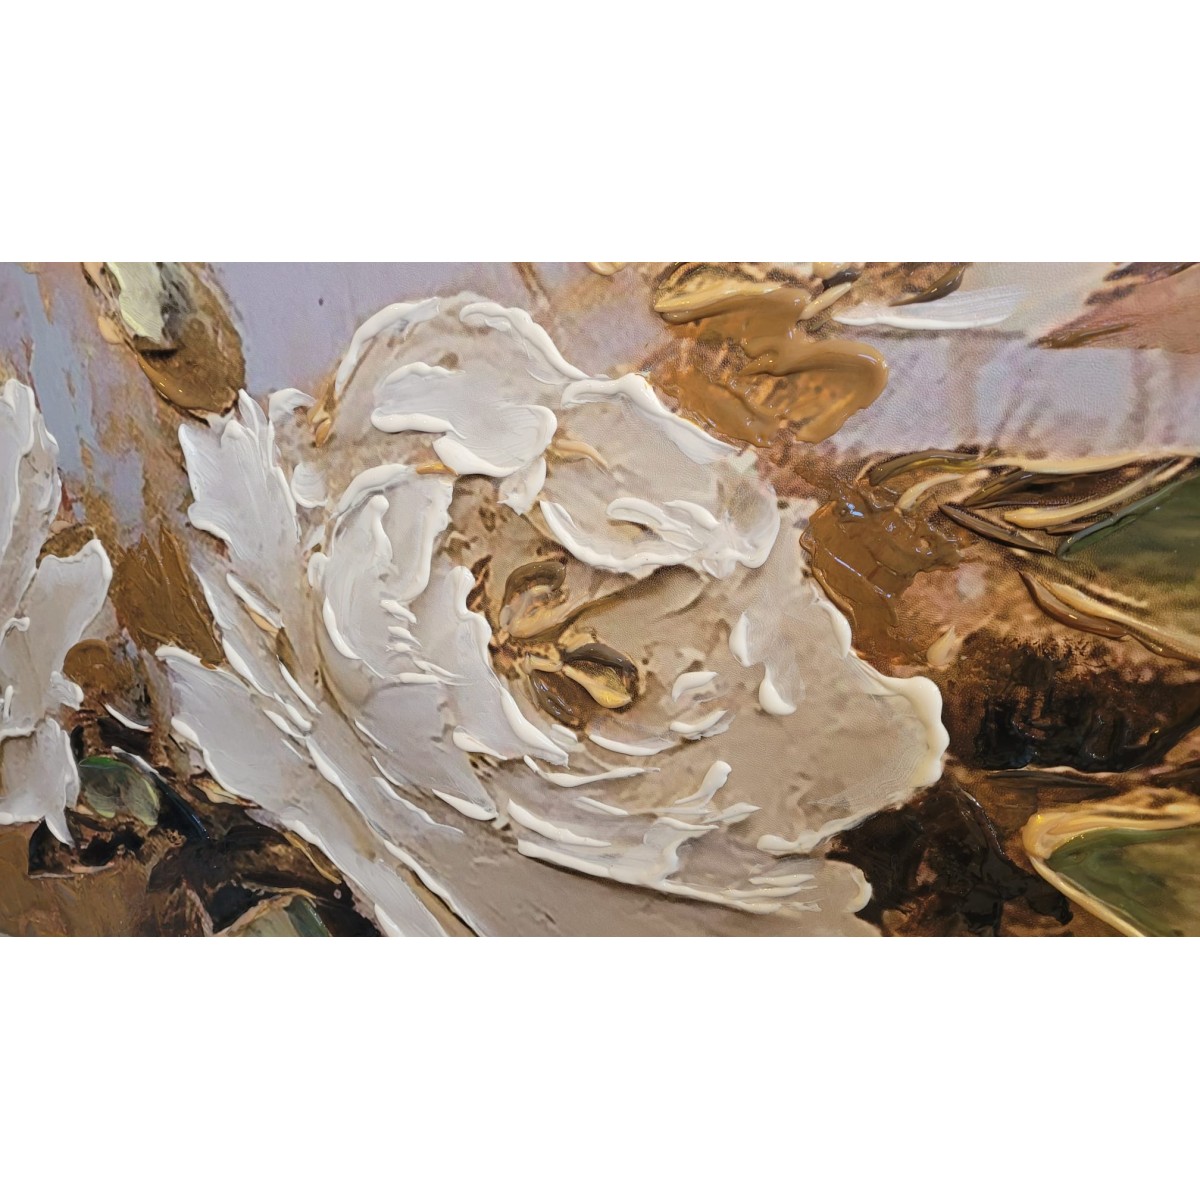 Cream Roses with Gold Leaf 3d Heavy Textured Partial Oil Painting